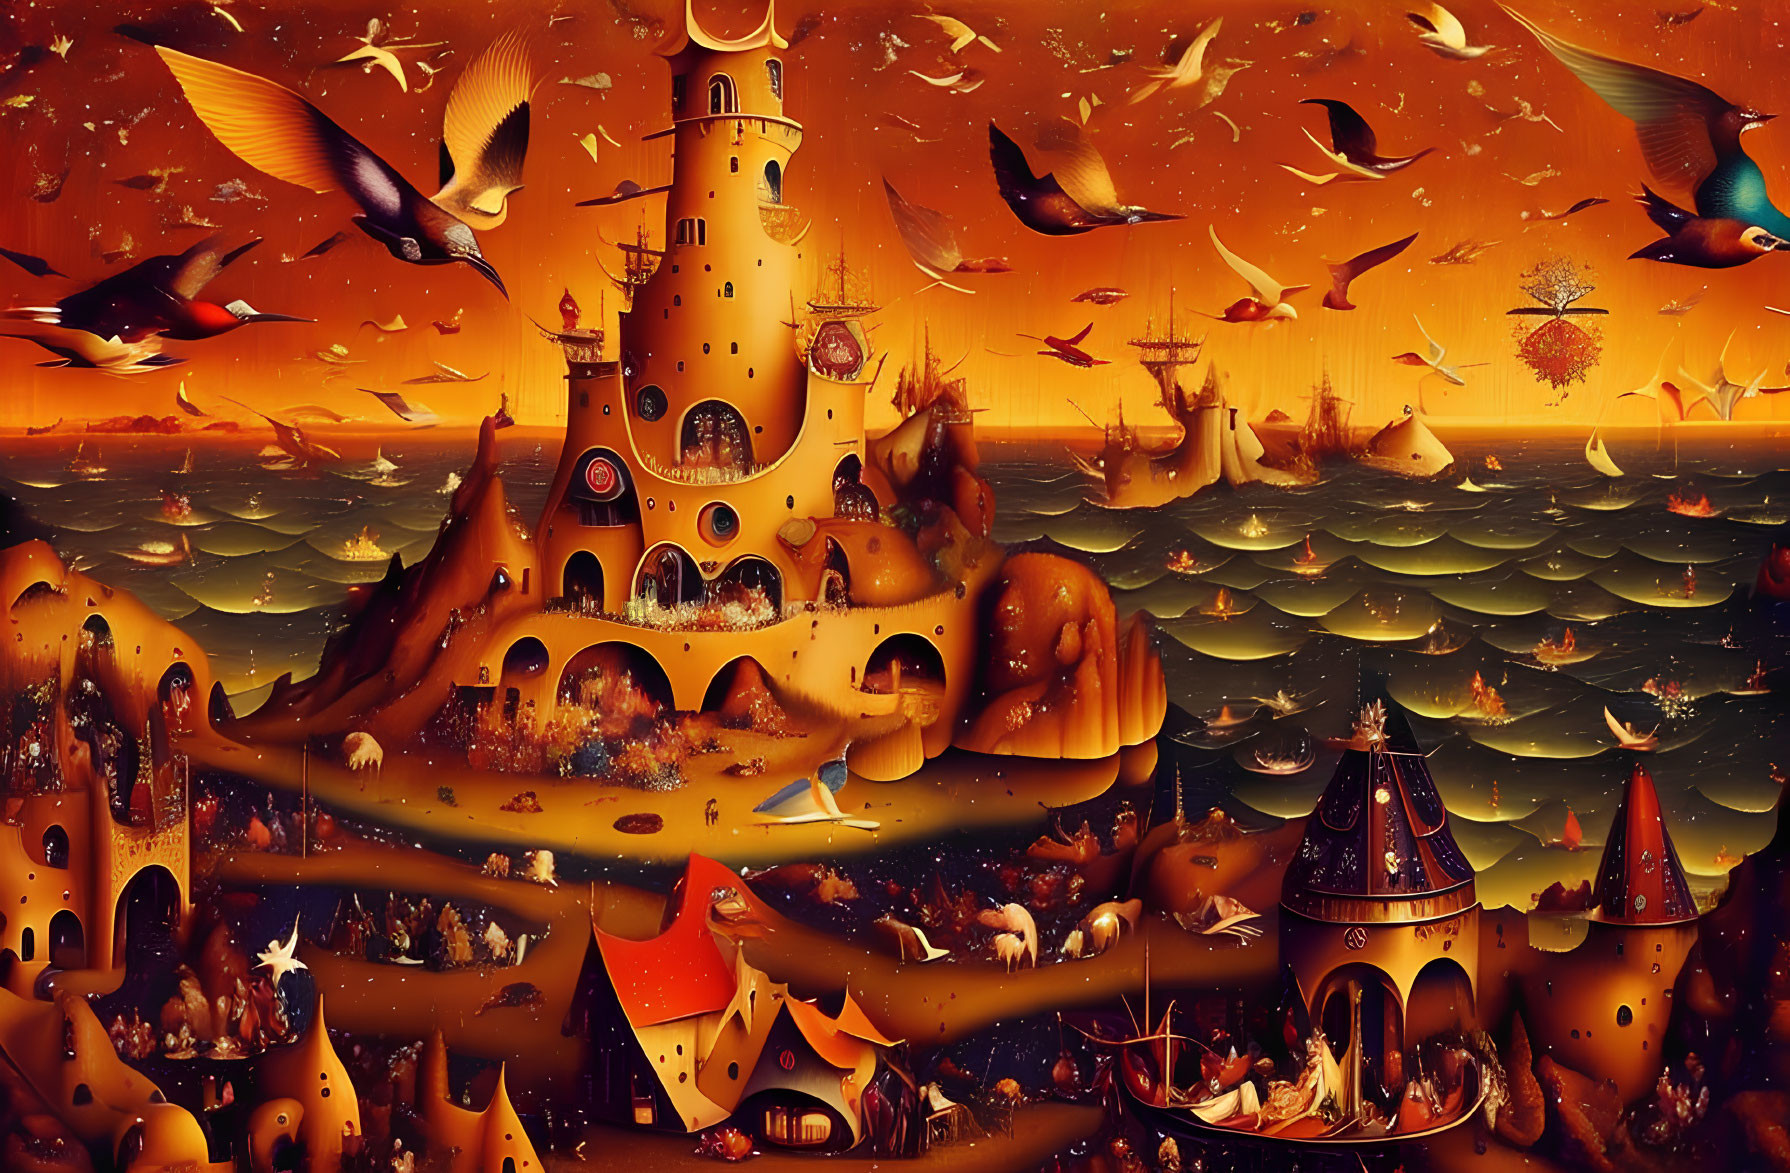 Fantasy landscape with whimsical structures and flying birds